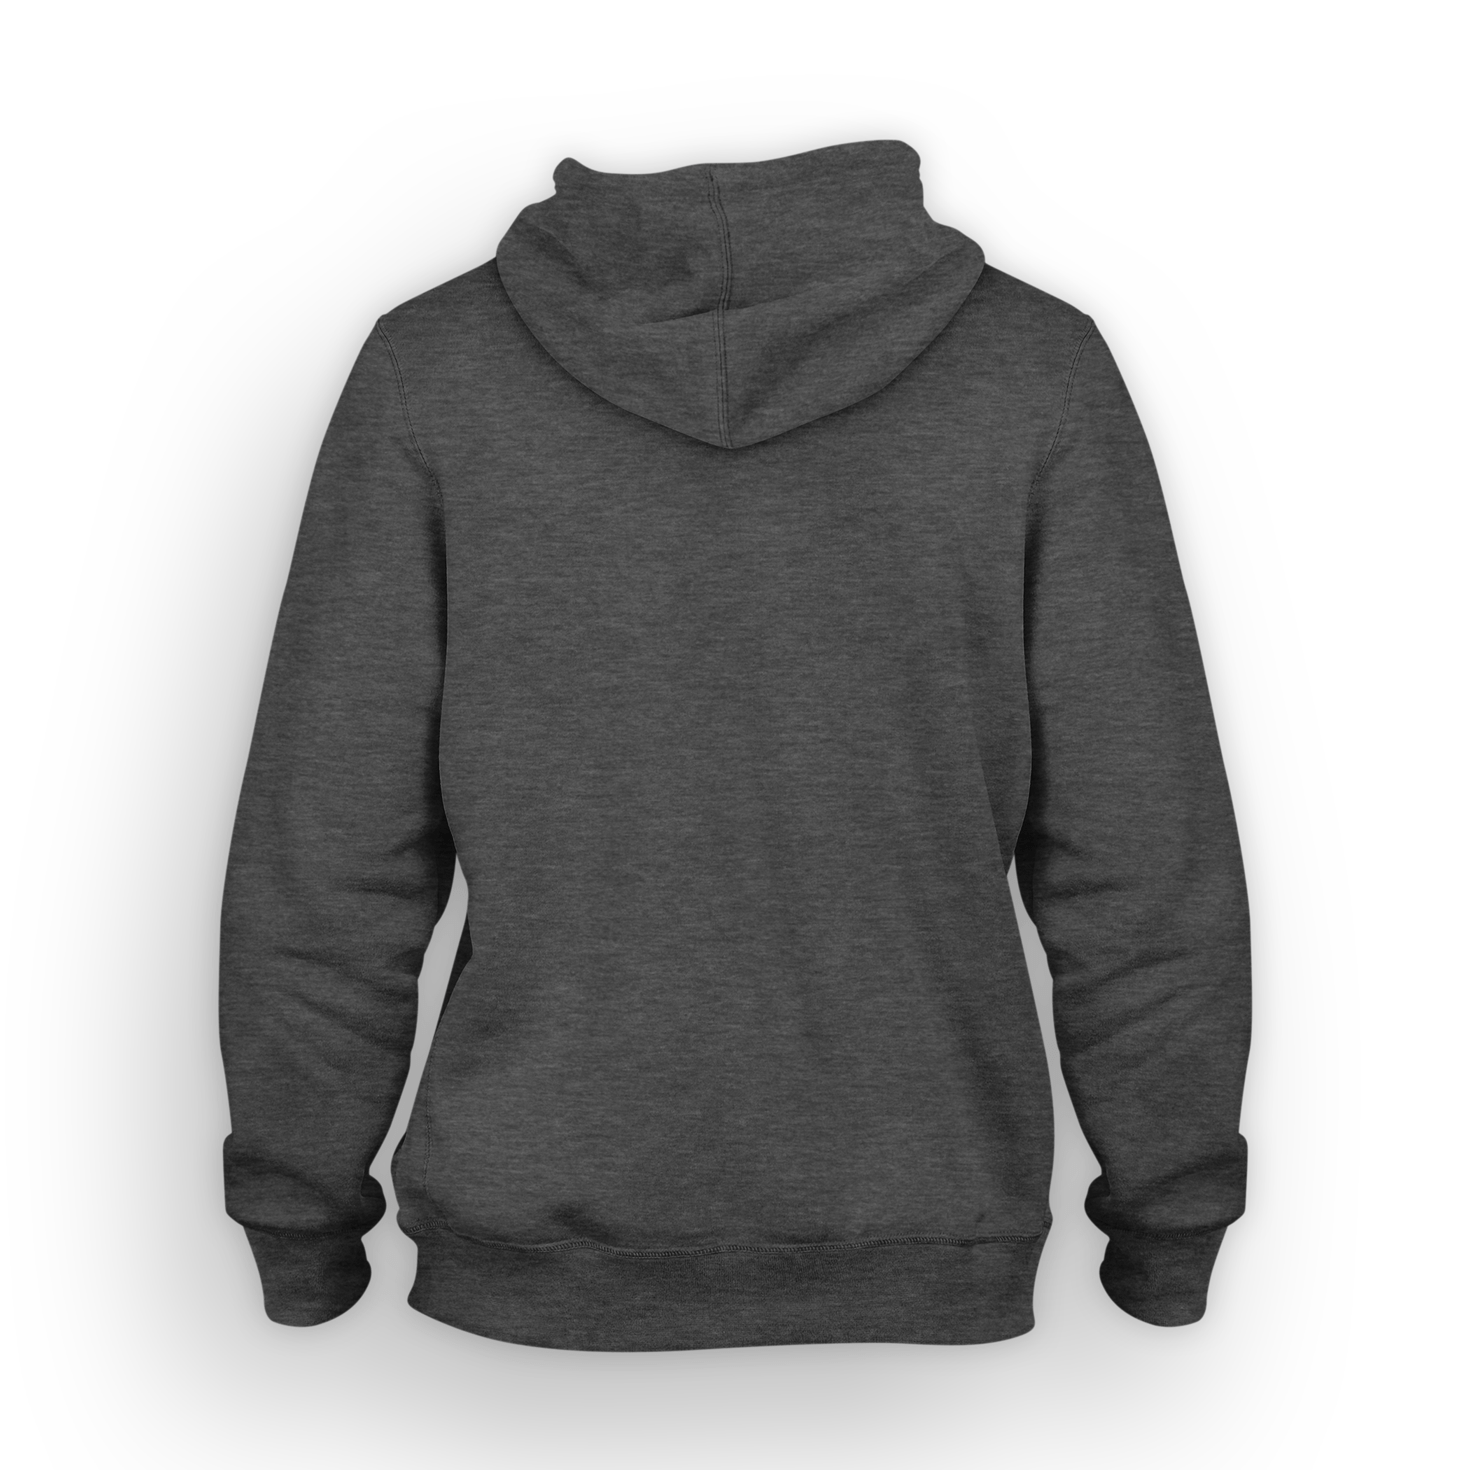 Bazarville Void HD S Hoodie - Charcoal Heather Grey